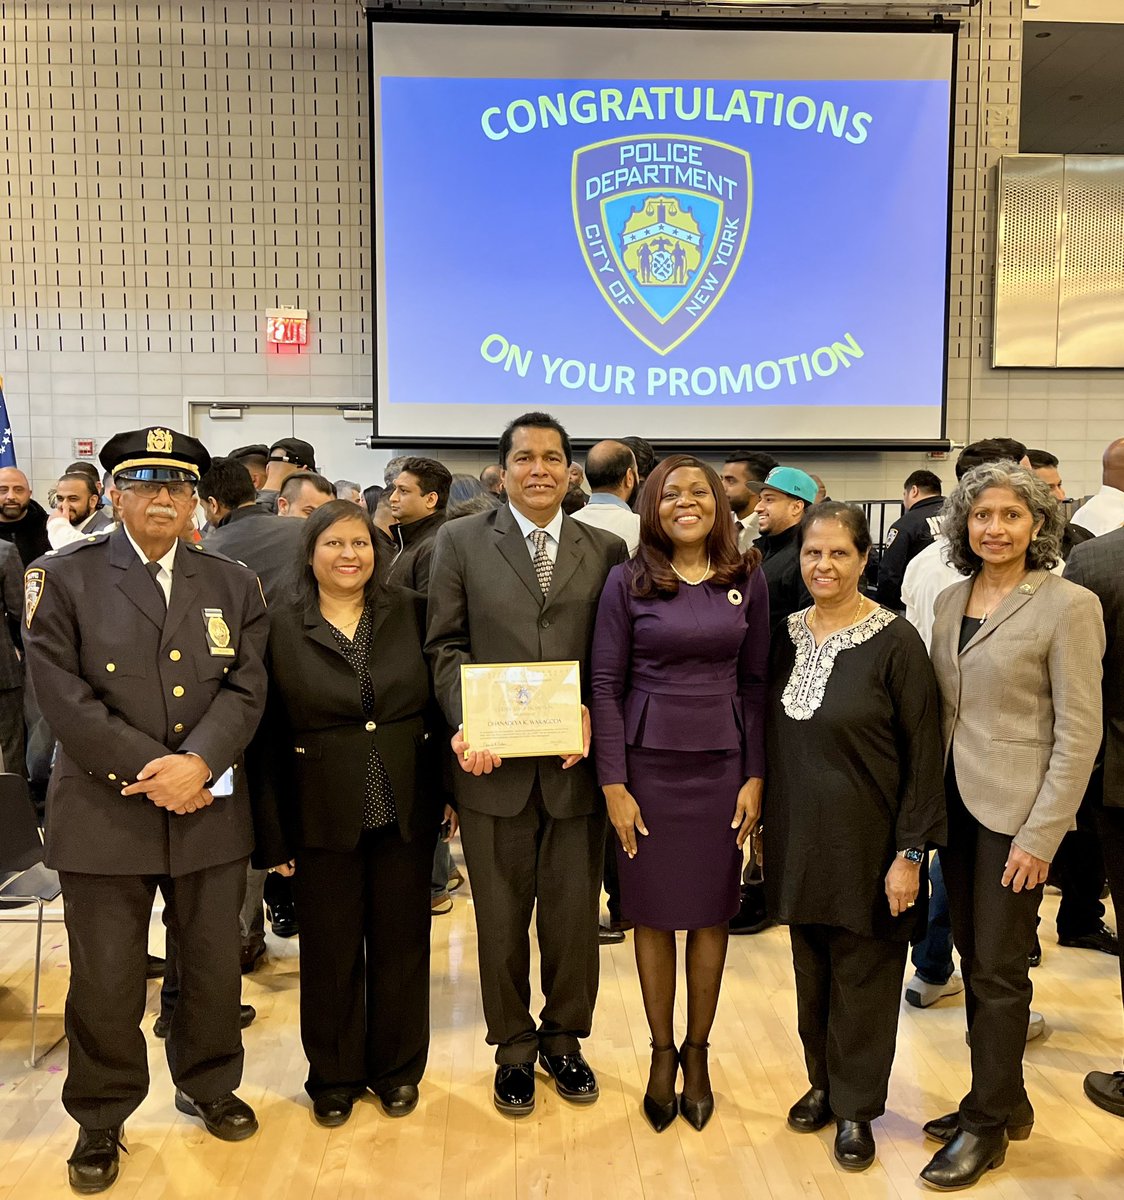 Congrats to Dhanadeva Waragoda, Queens Tow Pound on his well deserved promotion to Administrative Manager Auditor. He is also the son-in-law of the late Traffic Enforcement Agent, Kalyanaratne Ranasinghe who was killed by a vehicle in a Line of Duty traffic accident in 2013.